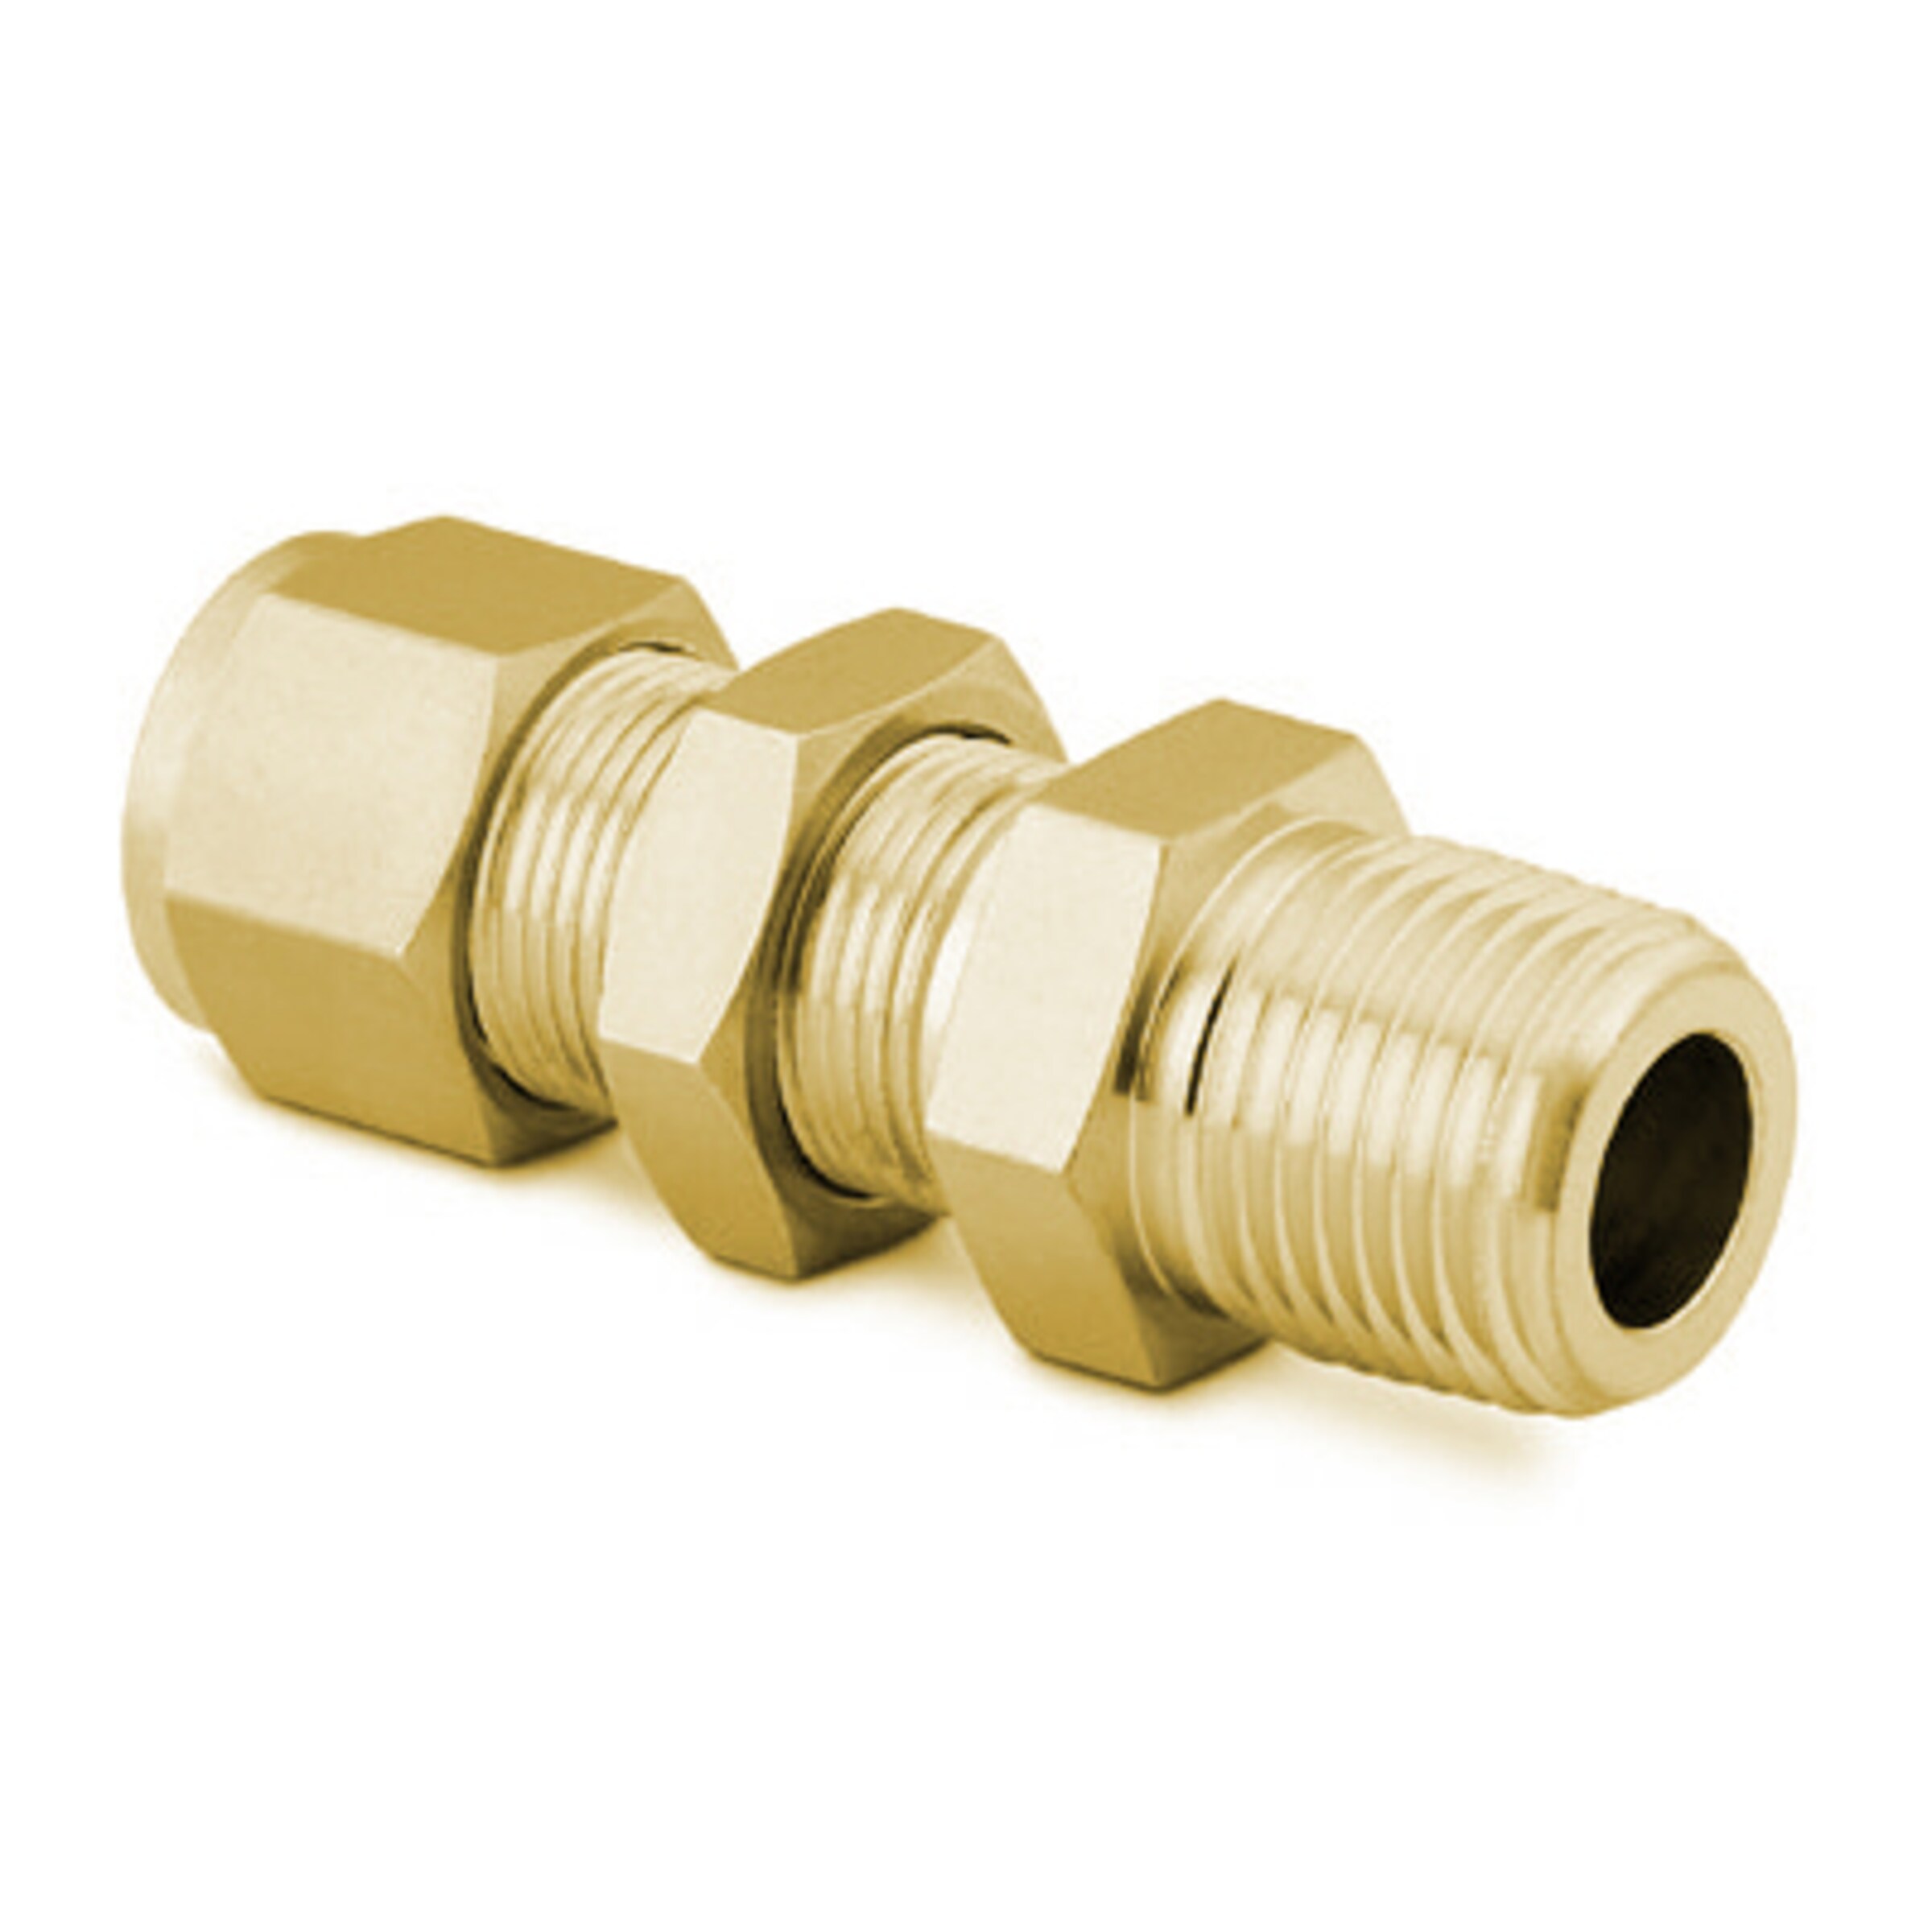 2 Pack 3/8 Compression Nut & Ferrule Combo for 3/8 OD Tube Brass